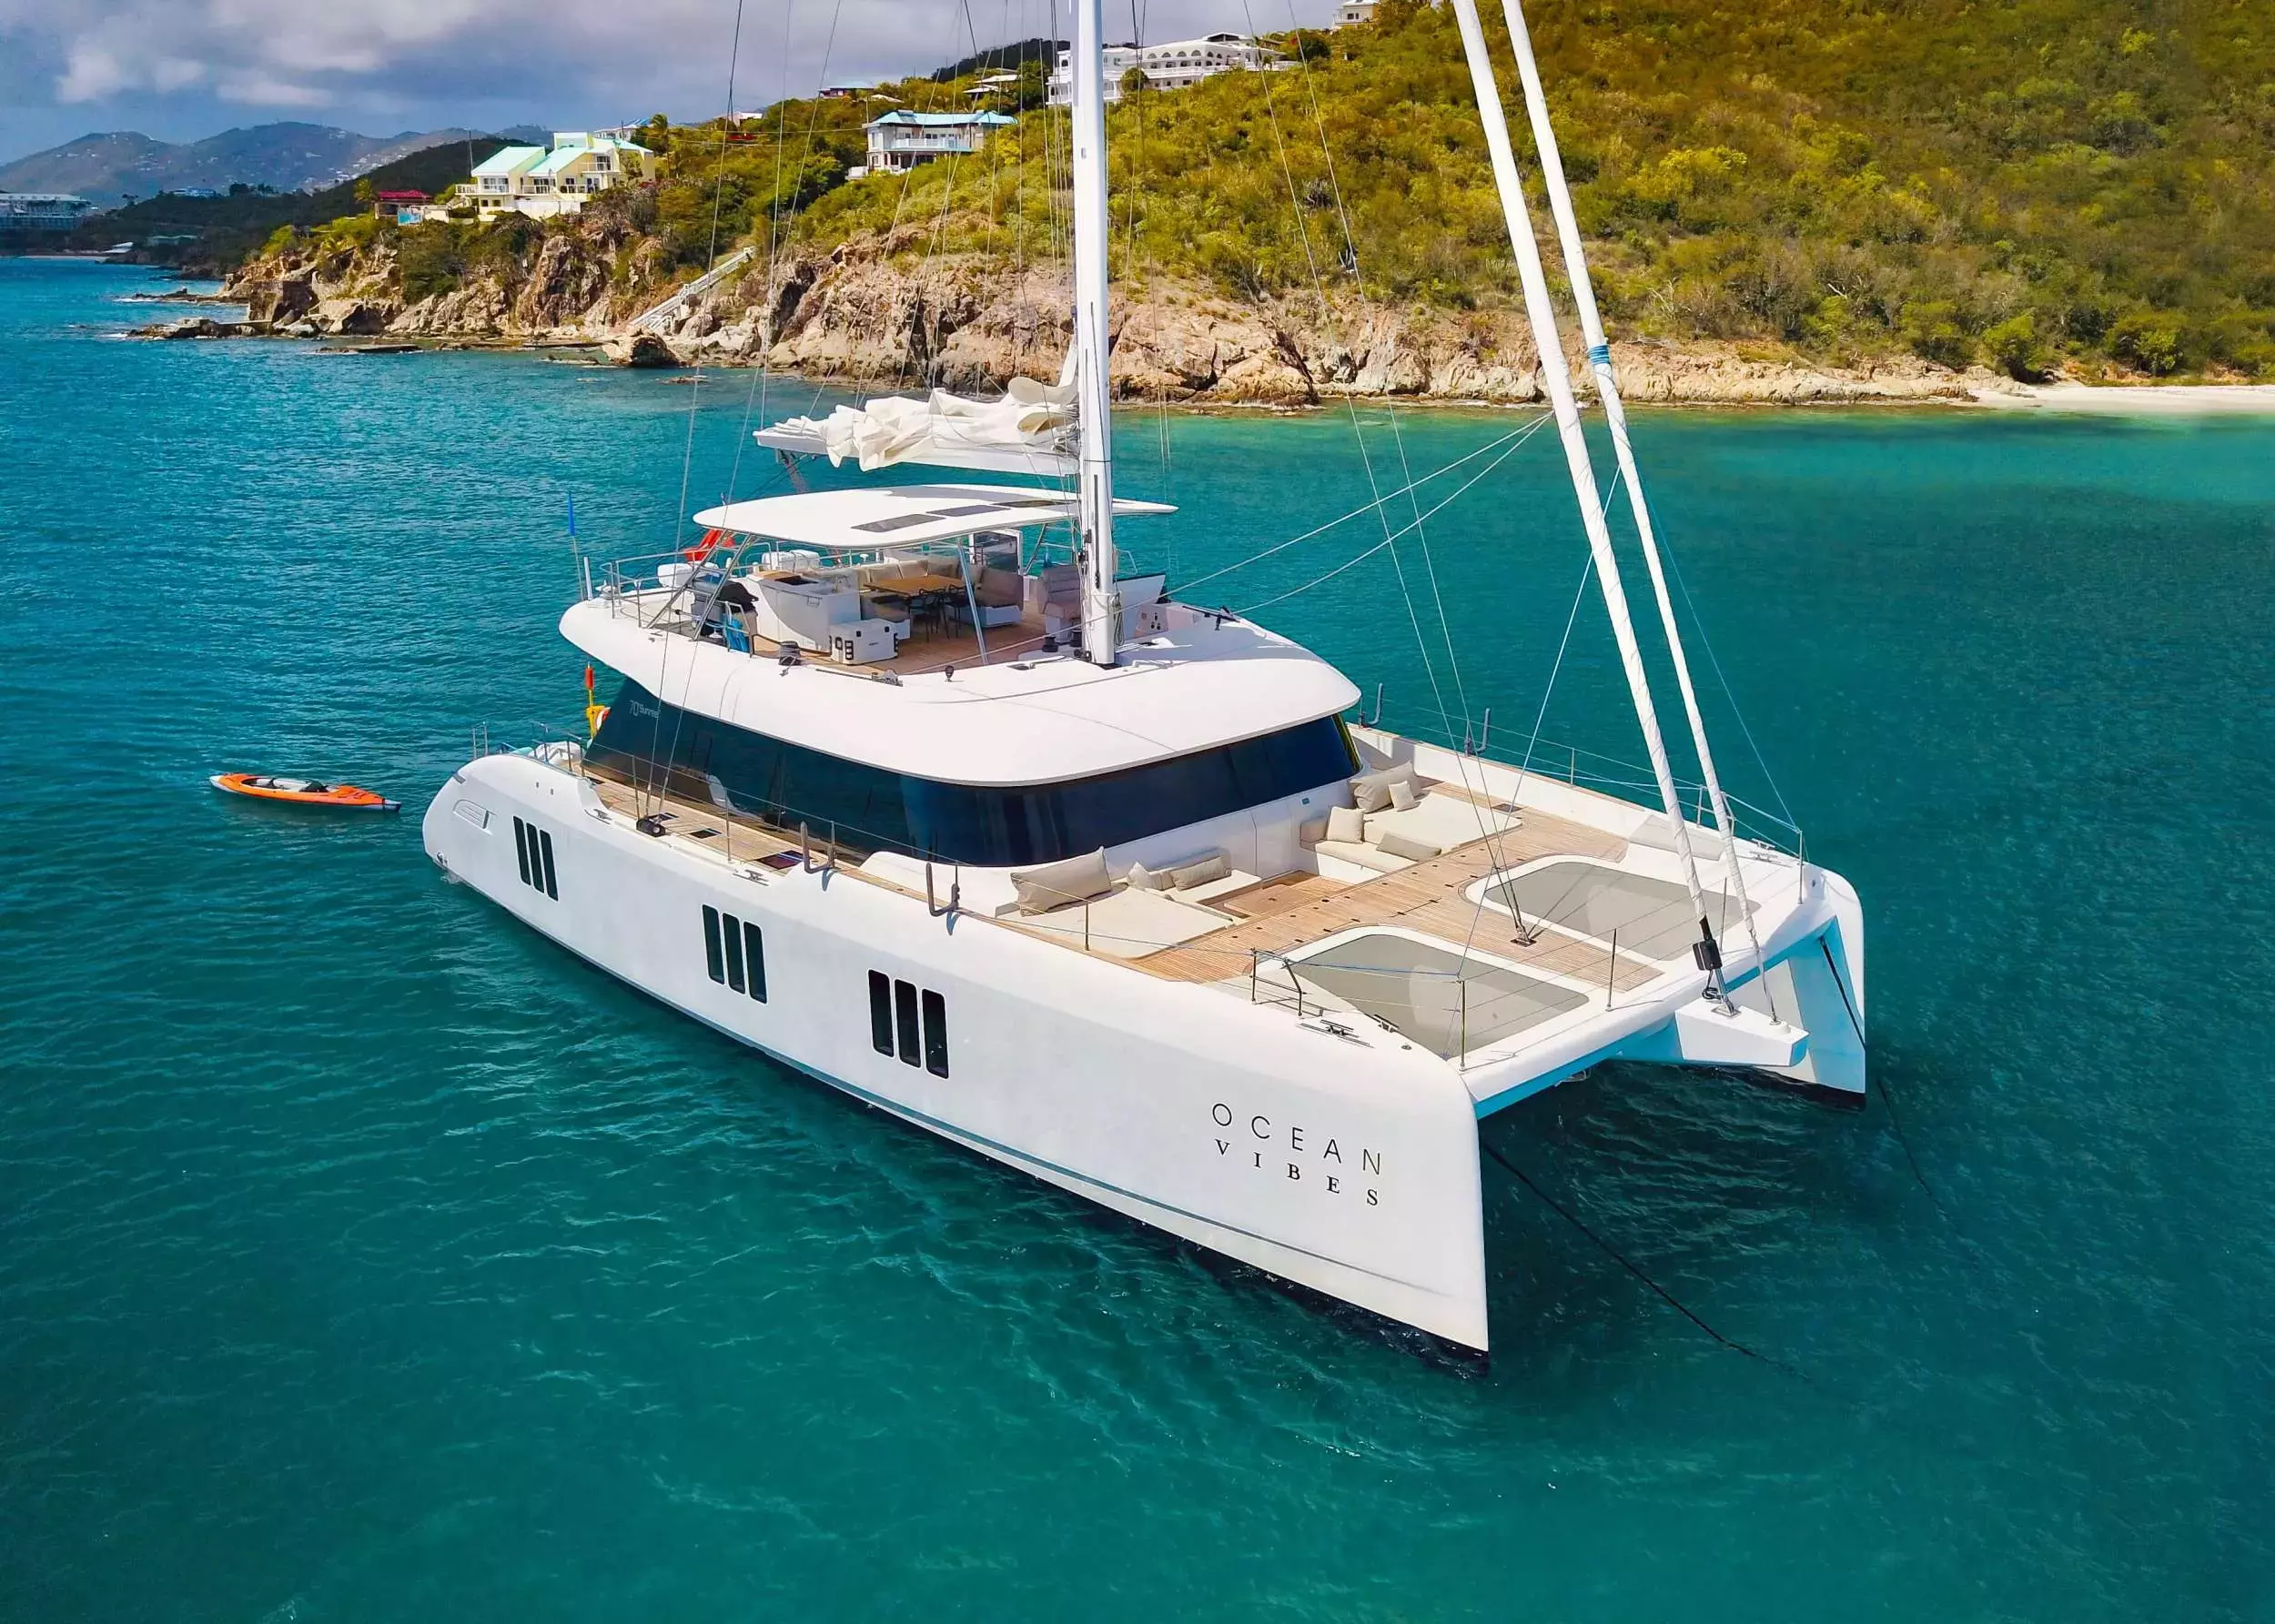 Ocean Vibes by Sunreef Yachts - Top rates for a Rental of a private Sailing Catamaran in British Virgin Islands